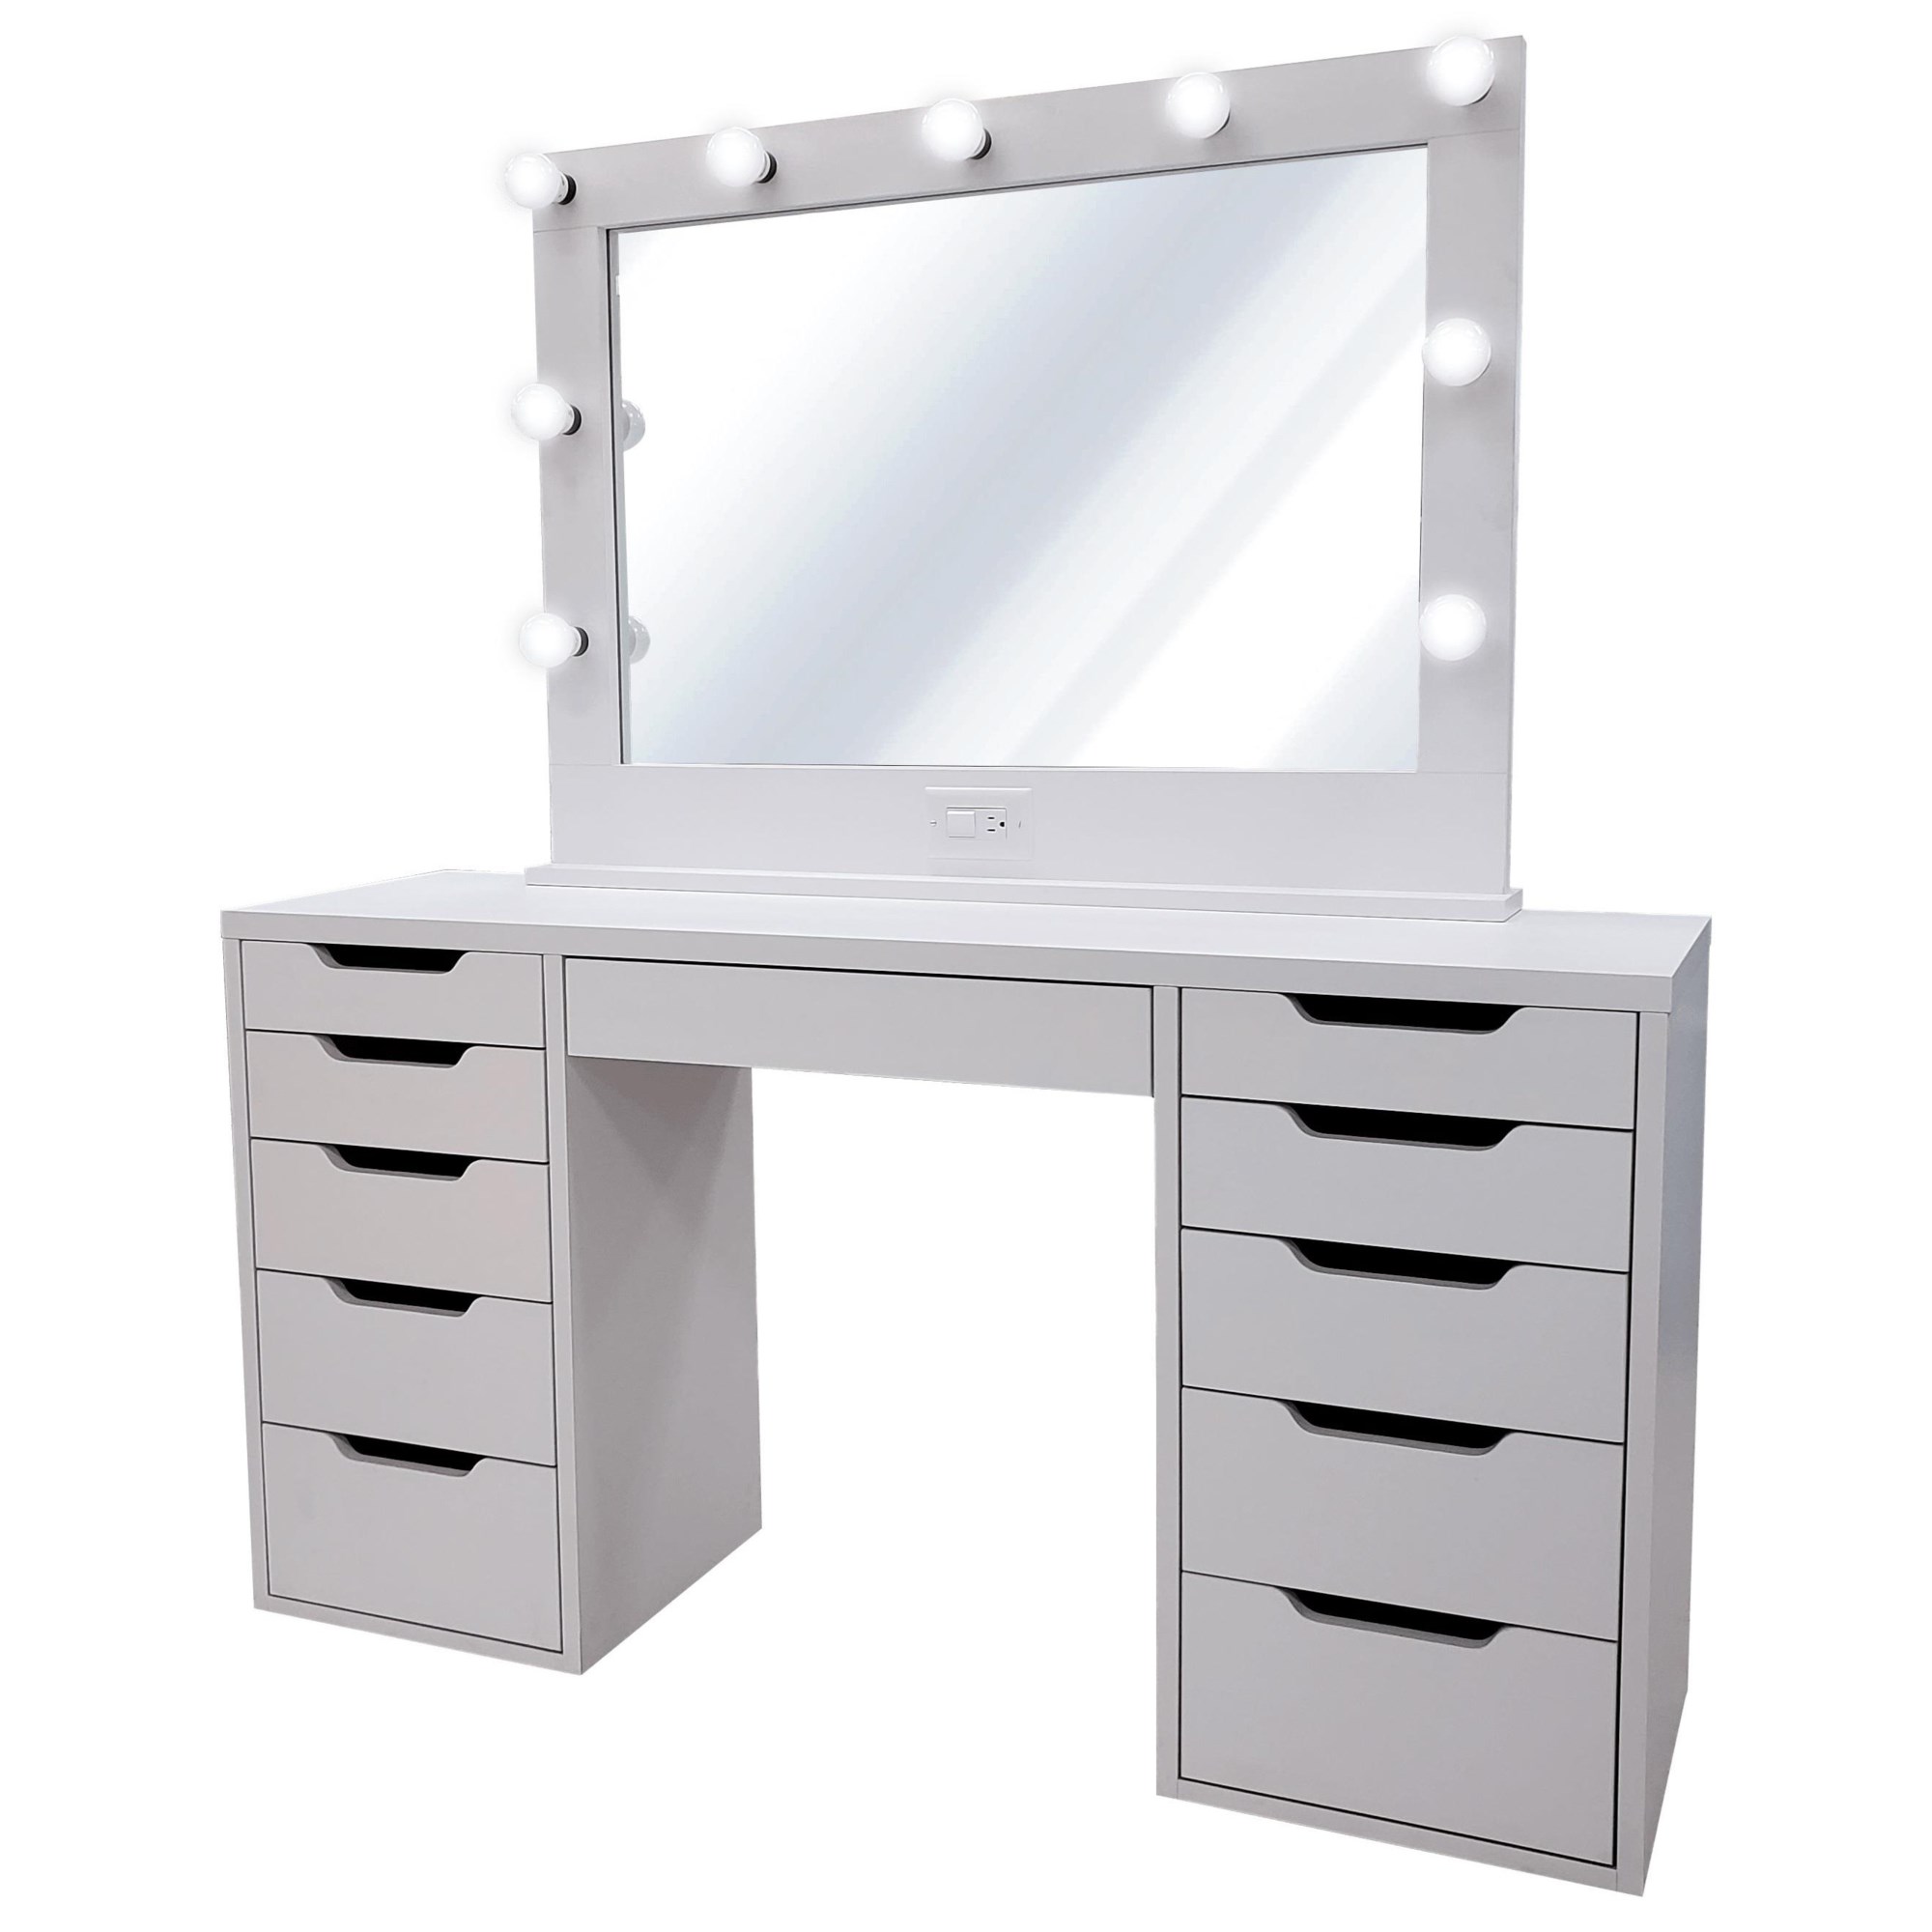 Vanity Desk with Lighted Mirror, Full Length Mirror & Wardrobe Closet for  Hanging Clothes, Wooden Vanity Desk with 3 Color Light, Hanging Rod & 5  Drawers for Bedroom Storage